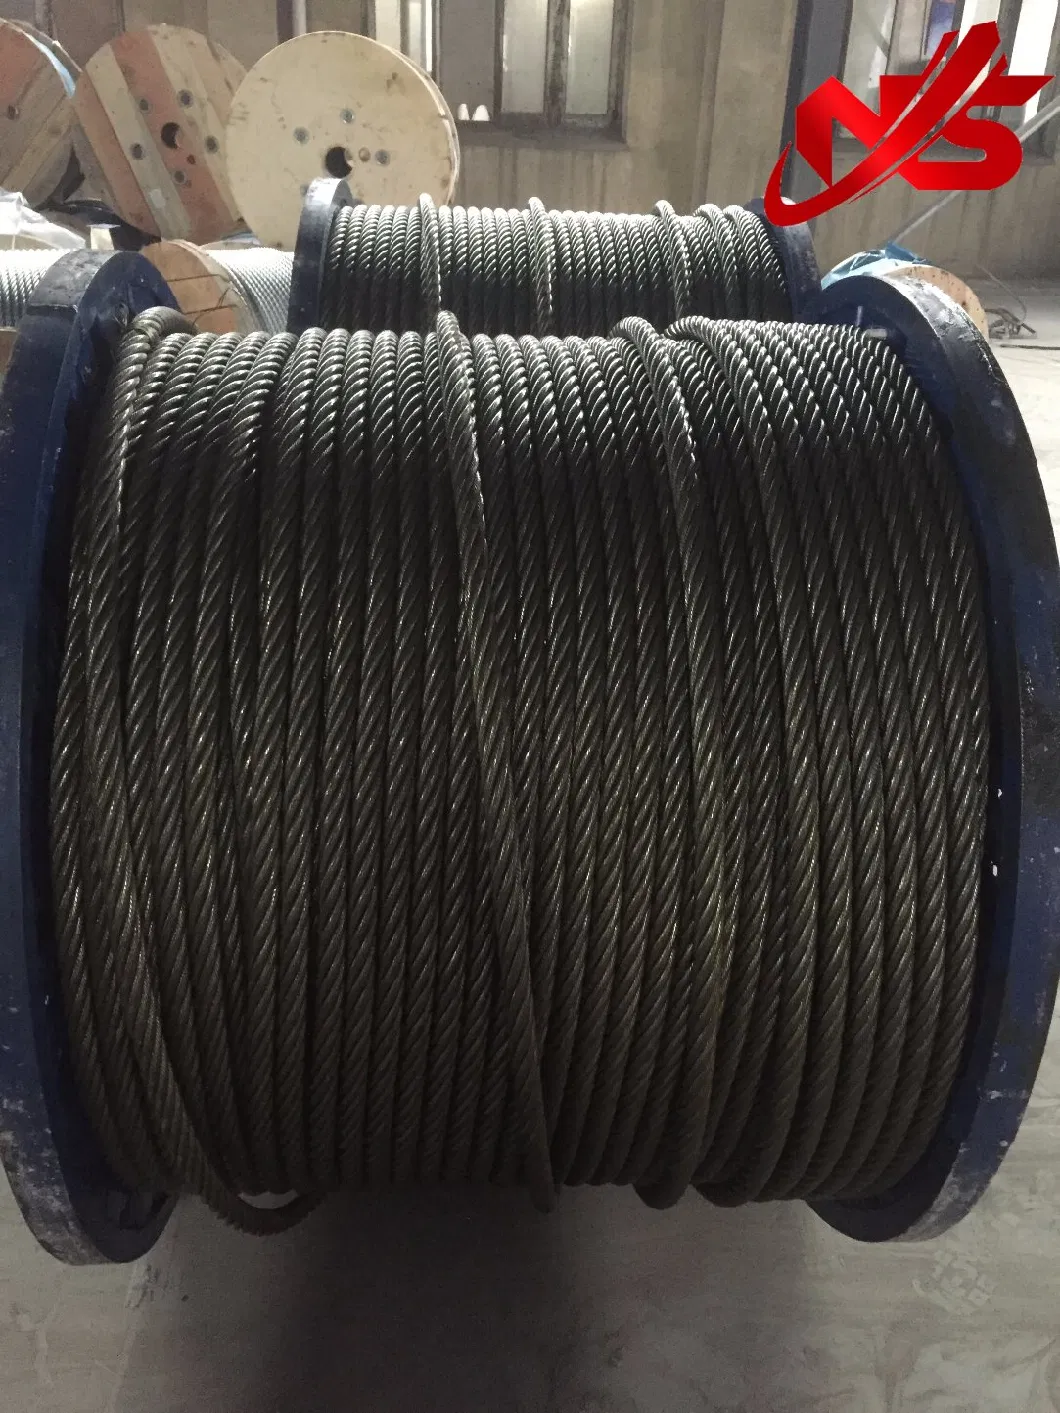 13mm Electric Cable Galvanized Steel Towing Wire Rope Price Steel Cable 7X19